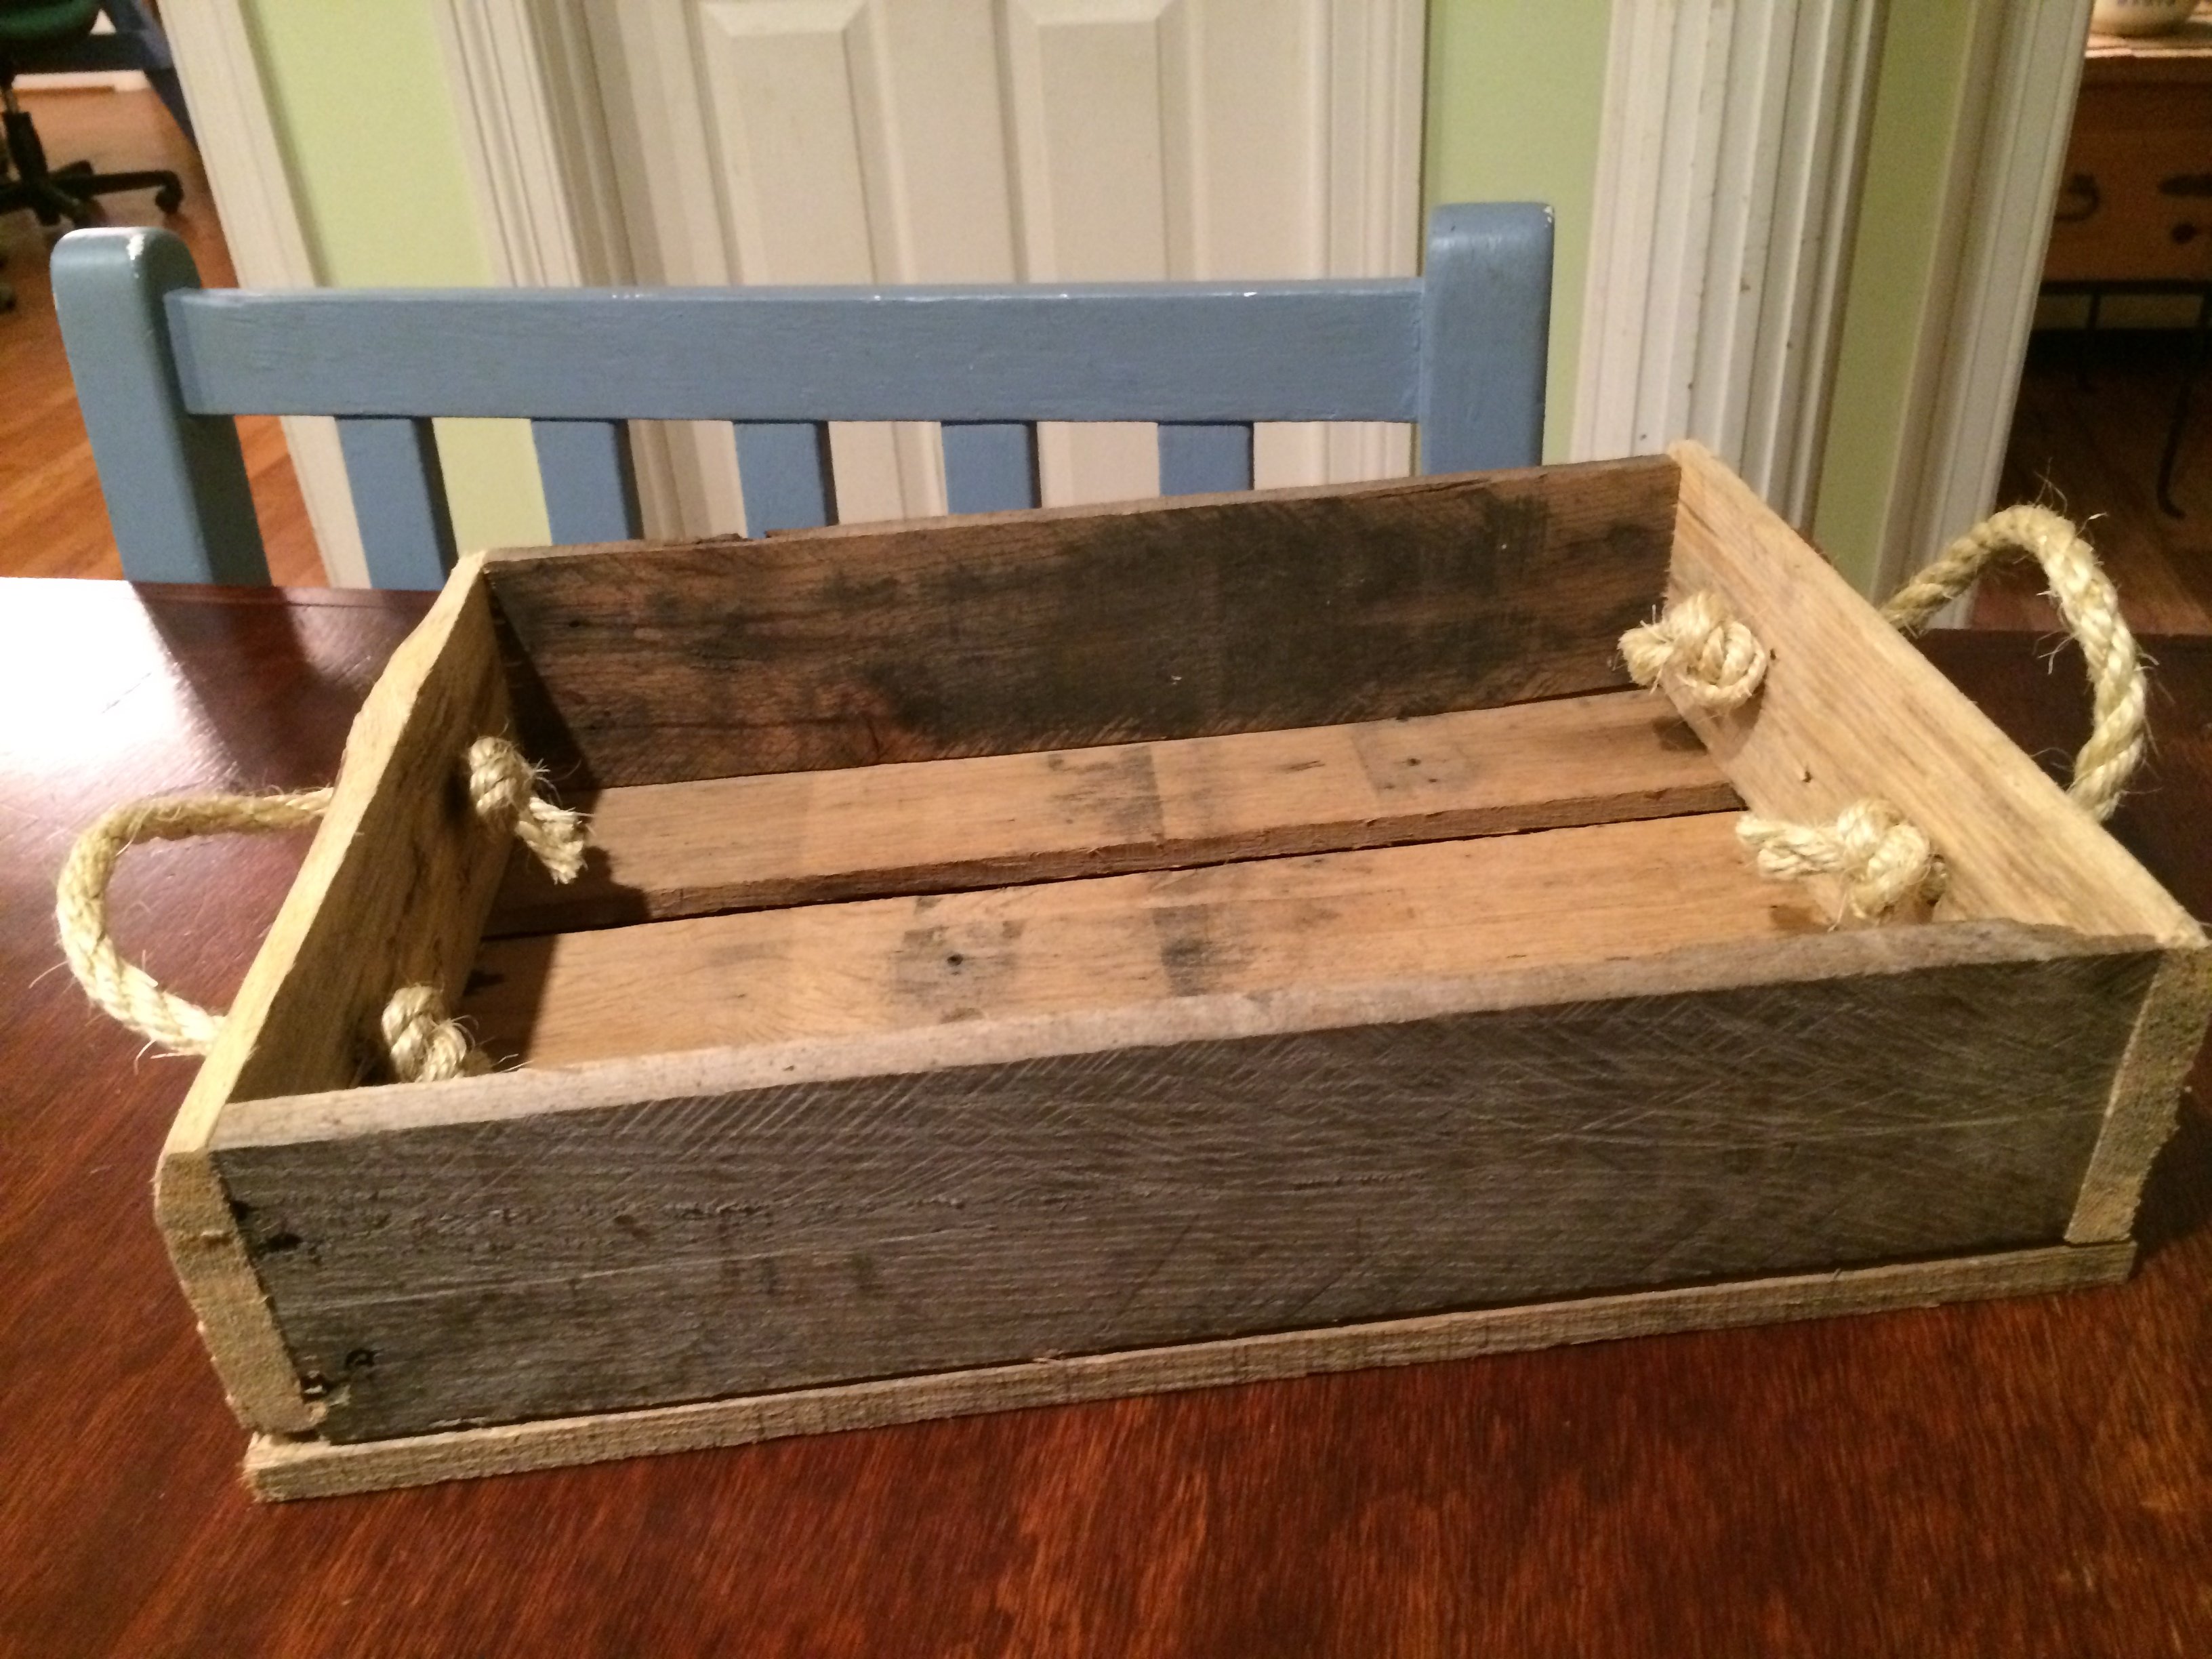 Ana White | Wooden Crate - DIY Projects